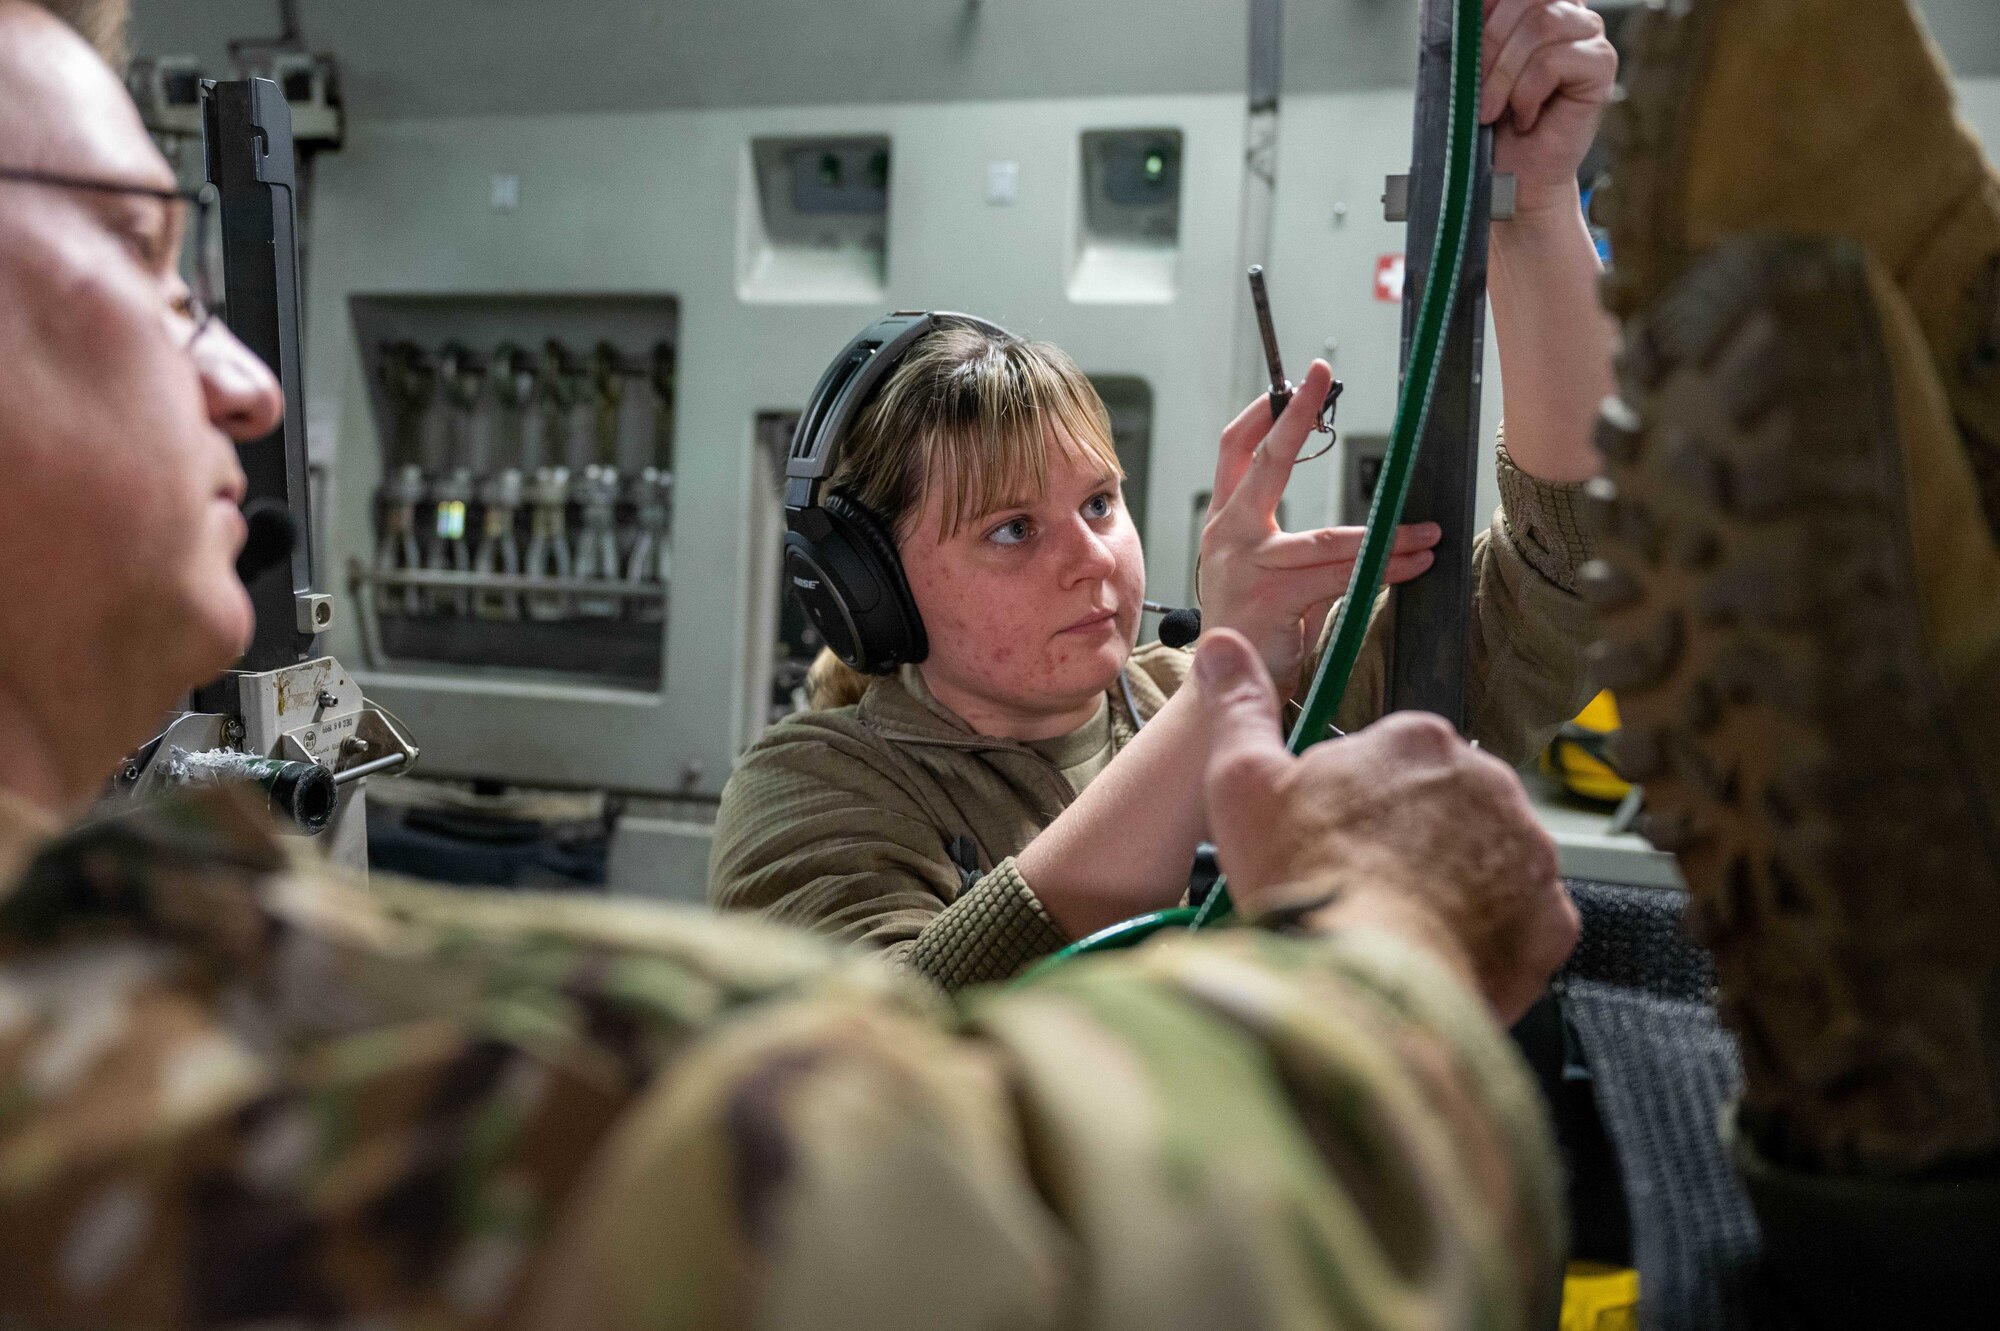 Senior Airman Taylor Sturgell, an aeromedical evacuation technician with the 934th Aeromedical Evacuation Squadron, connects an oxygen hose for an in-flight patient during an exercise at Minneapolis St. Paul International Airport Air Reserve Station, October 21, 2022. The exercise was planned and executed to test interoperabilty of international joint forces. (U.S. Air Force photo by Master Sgt. Trevor Saylor)